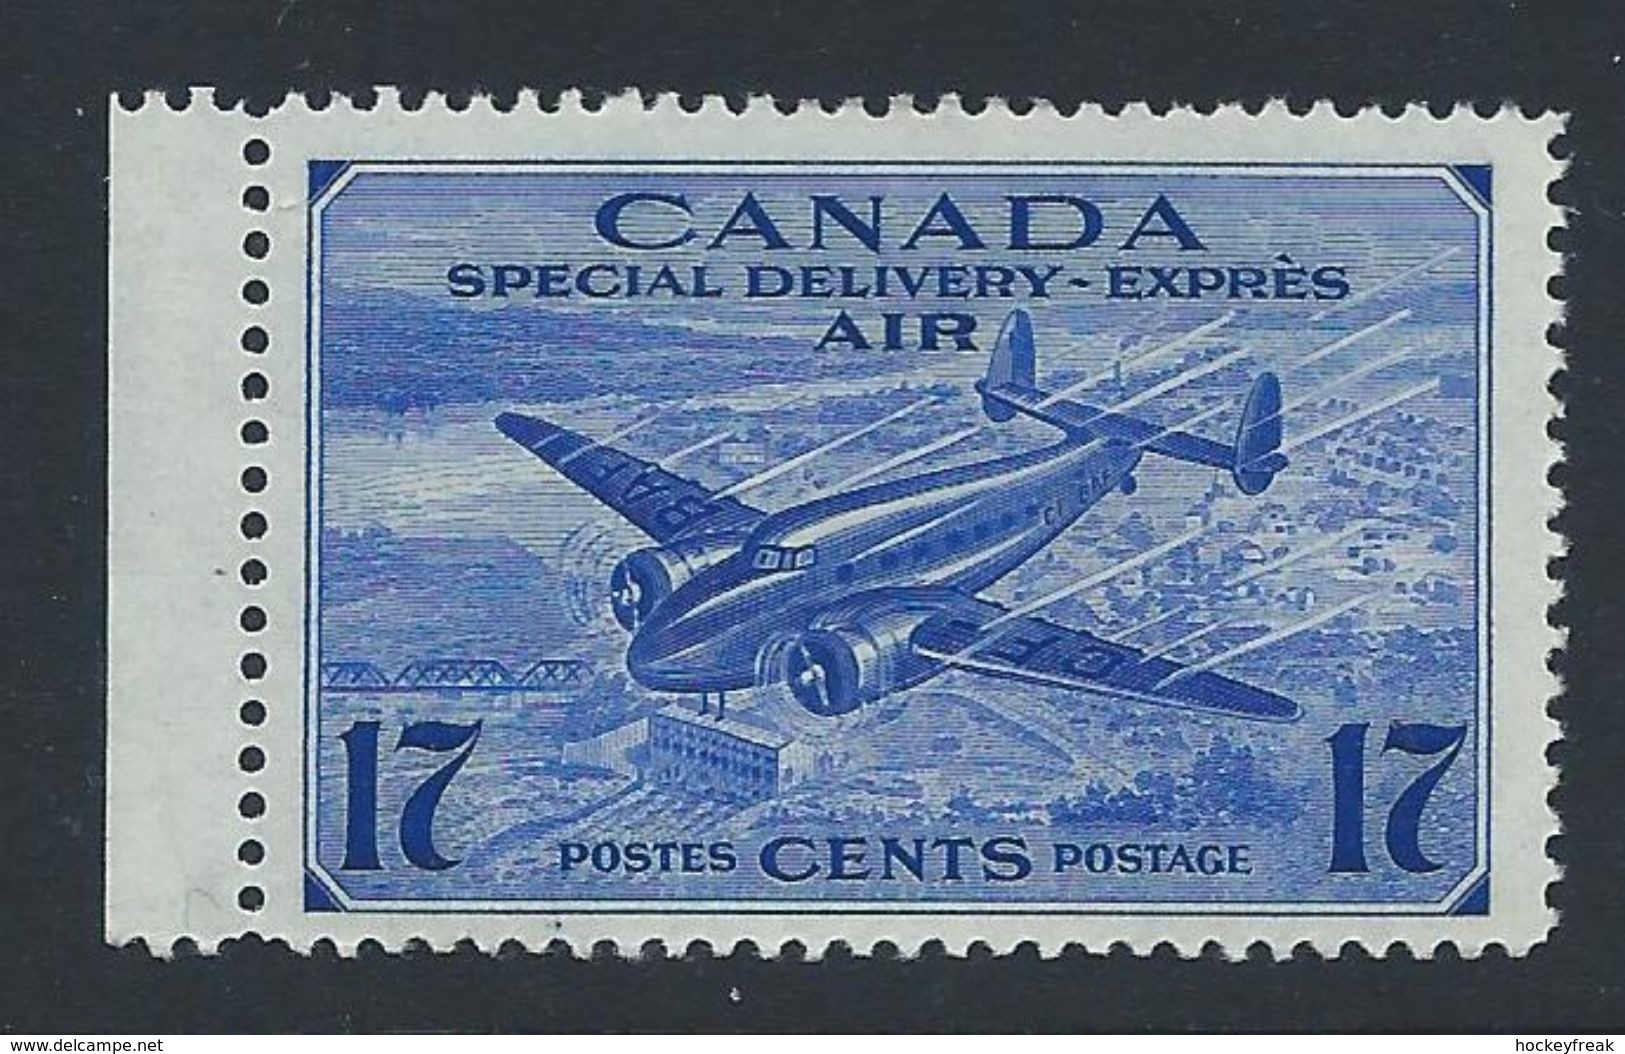 Canada 1943 - 17c Special Delivery Airmail Issue SG S14 Side Marginal MNH Cat £4.50 SG2018 Empire - Luftpost-Express